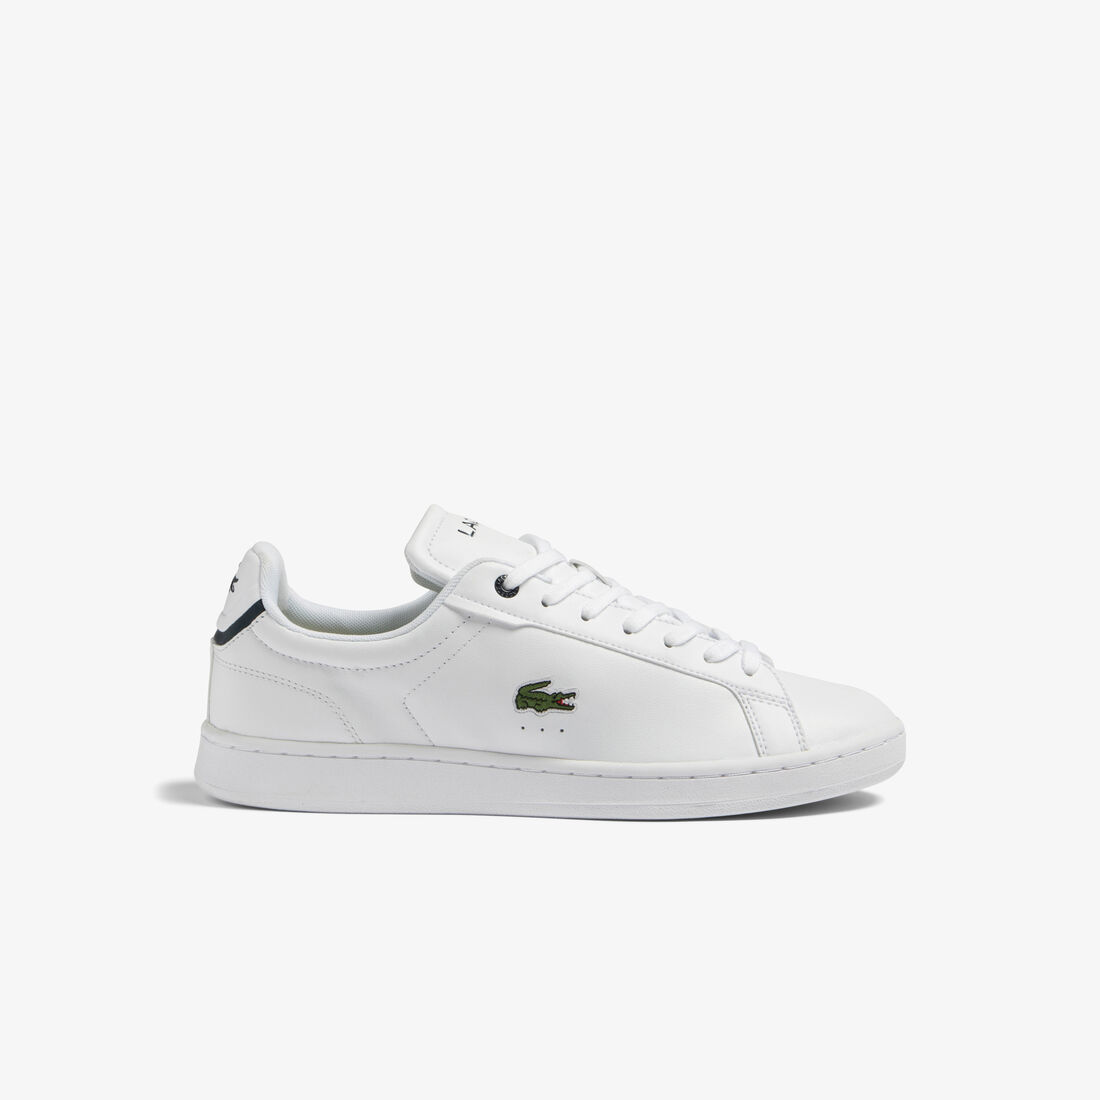 Men's Lacoste Carnaby Pro BL Leather Tonal Trainers - 45SMA0110-042